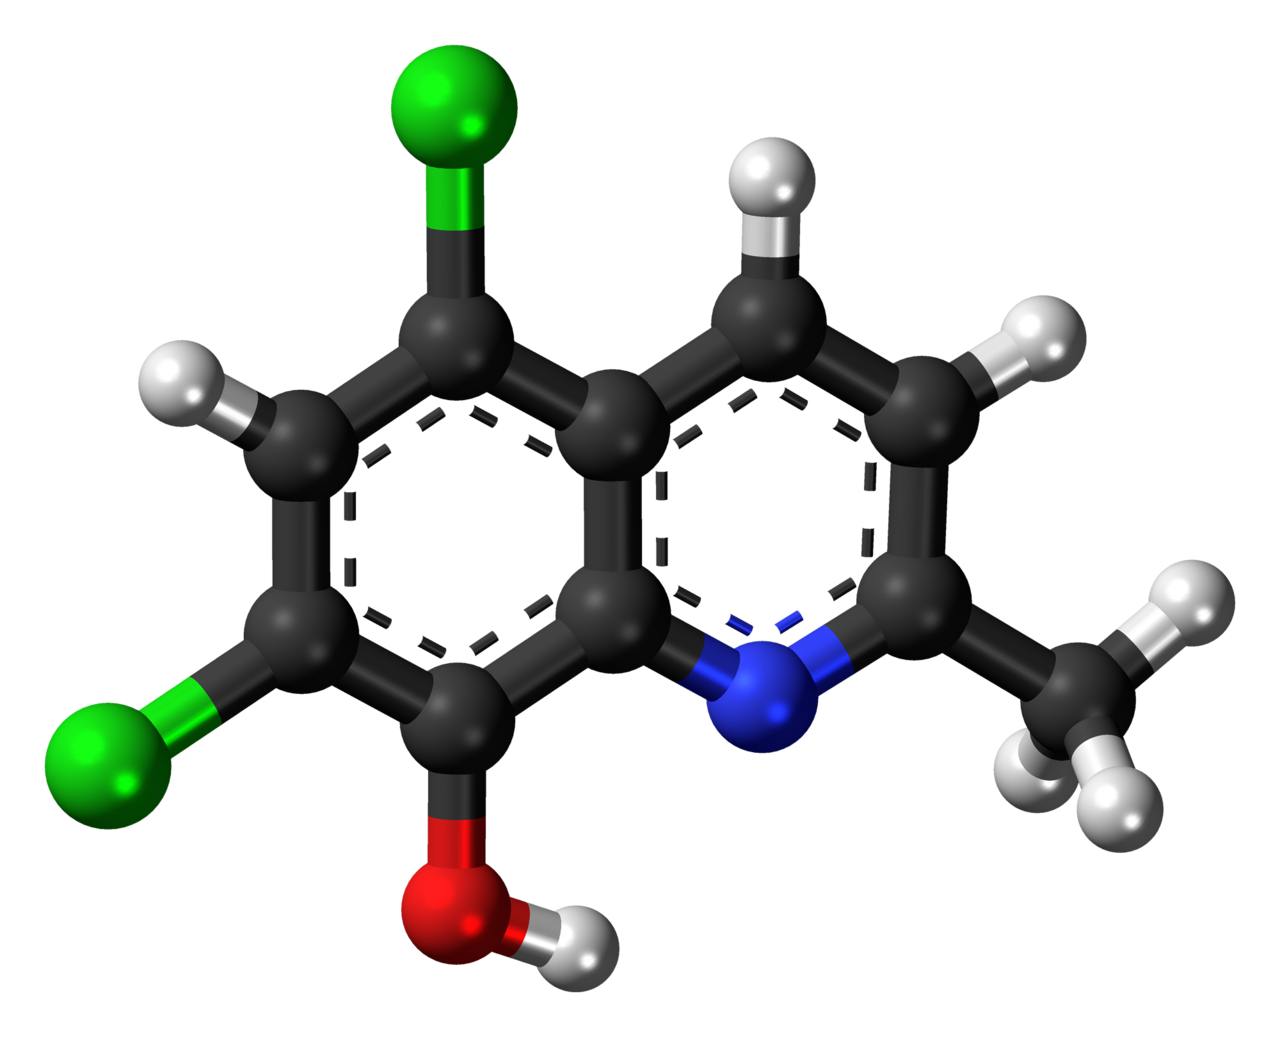 Ball-and-stick model of the chlorquinaldol molecule